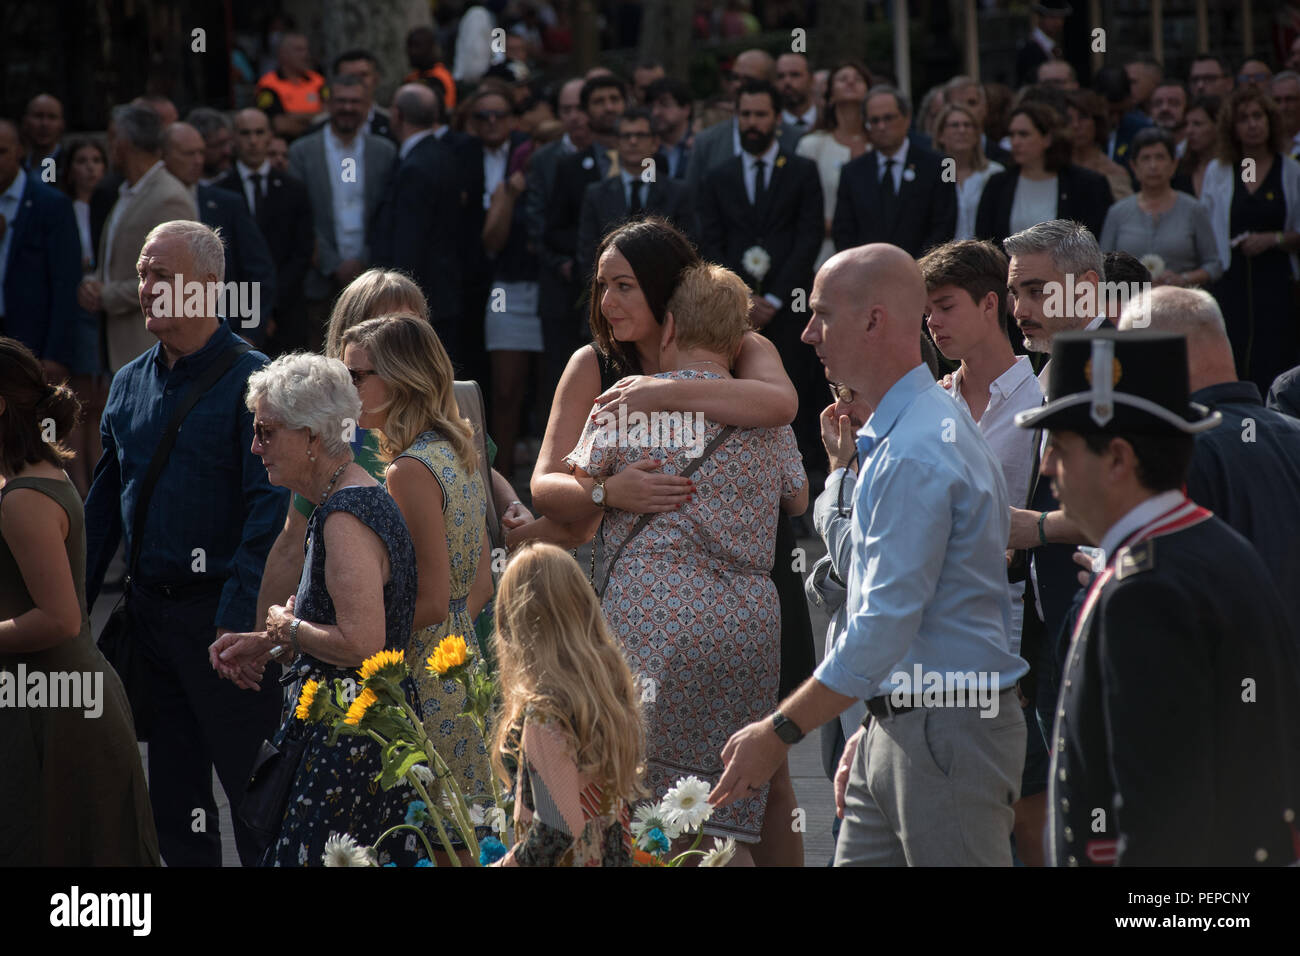 Barcelona, Catalonia, Spain. 17th Aug, 2018. Relatives of victims preceding local authorities pay tribute in Las Ramblas of Barcelona after one year of the terror attacks that killed 16 people and injured more than 120 when two vehicles crashed into the crowds in Barcelona and Cambrils. Credit: Jordi Boixareu/ZUMA Wire/Alamy Live News Stock Photo